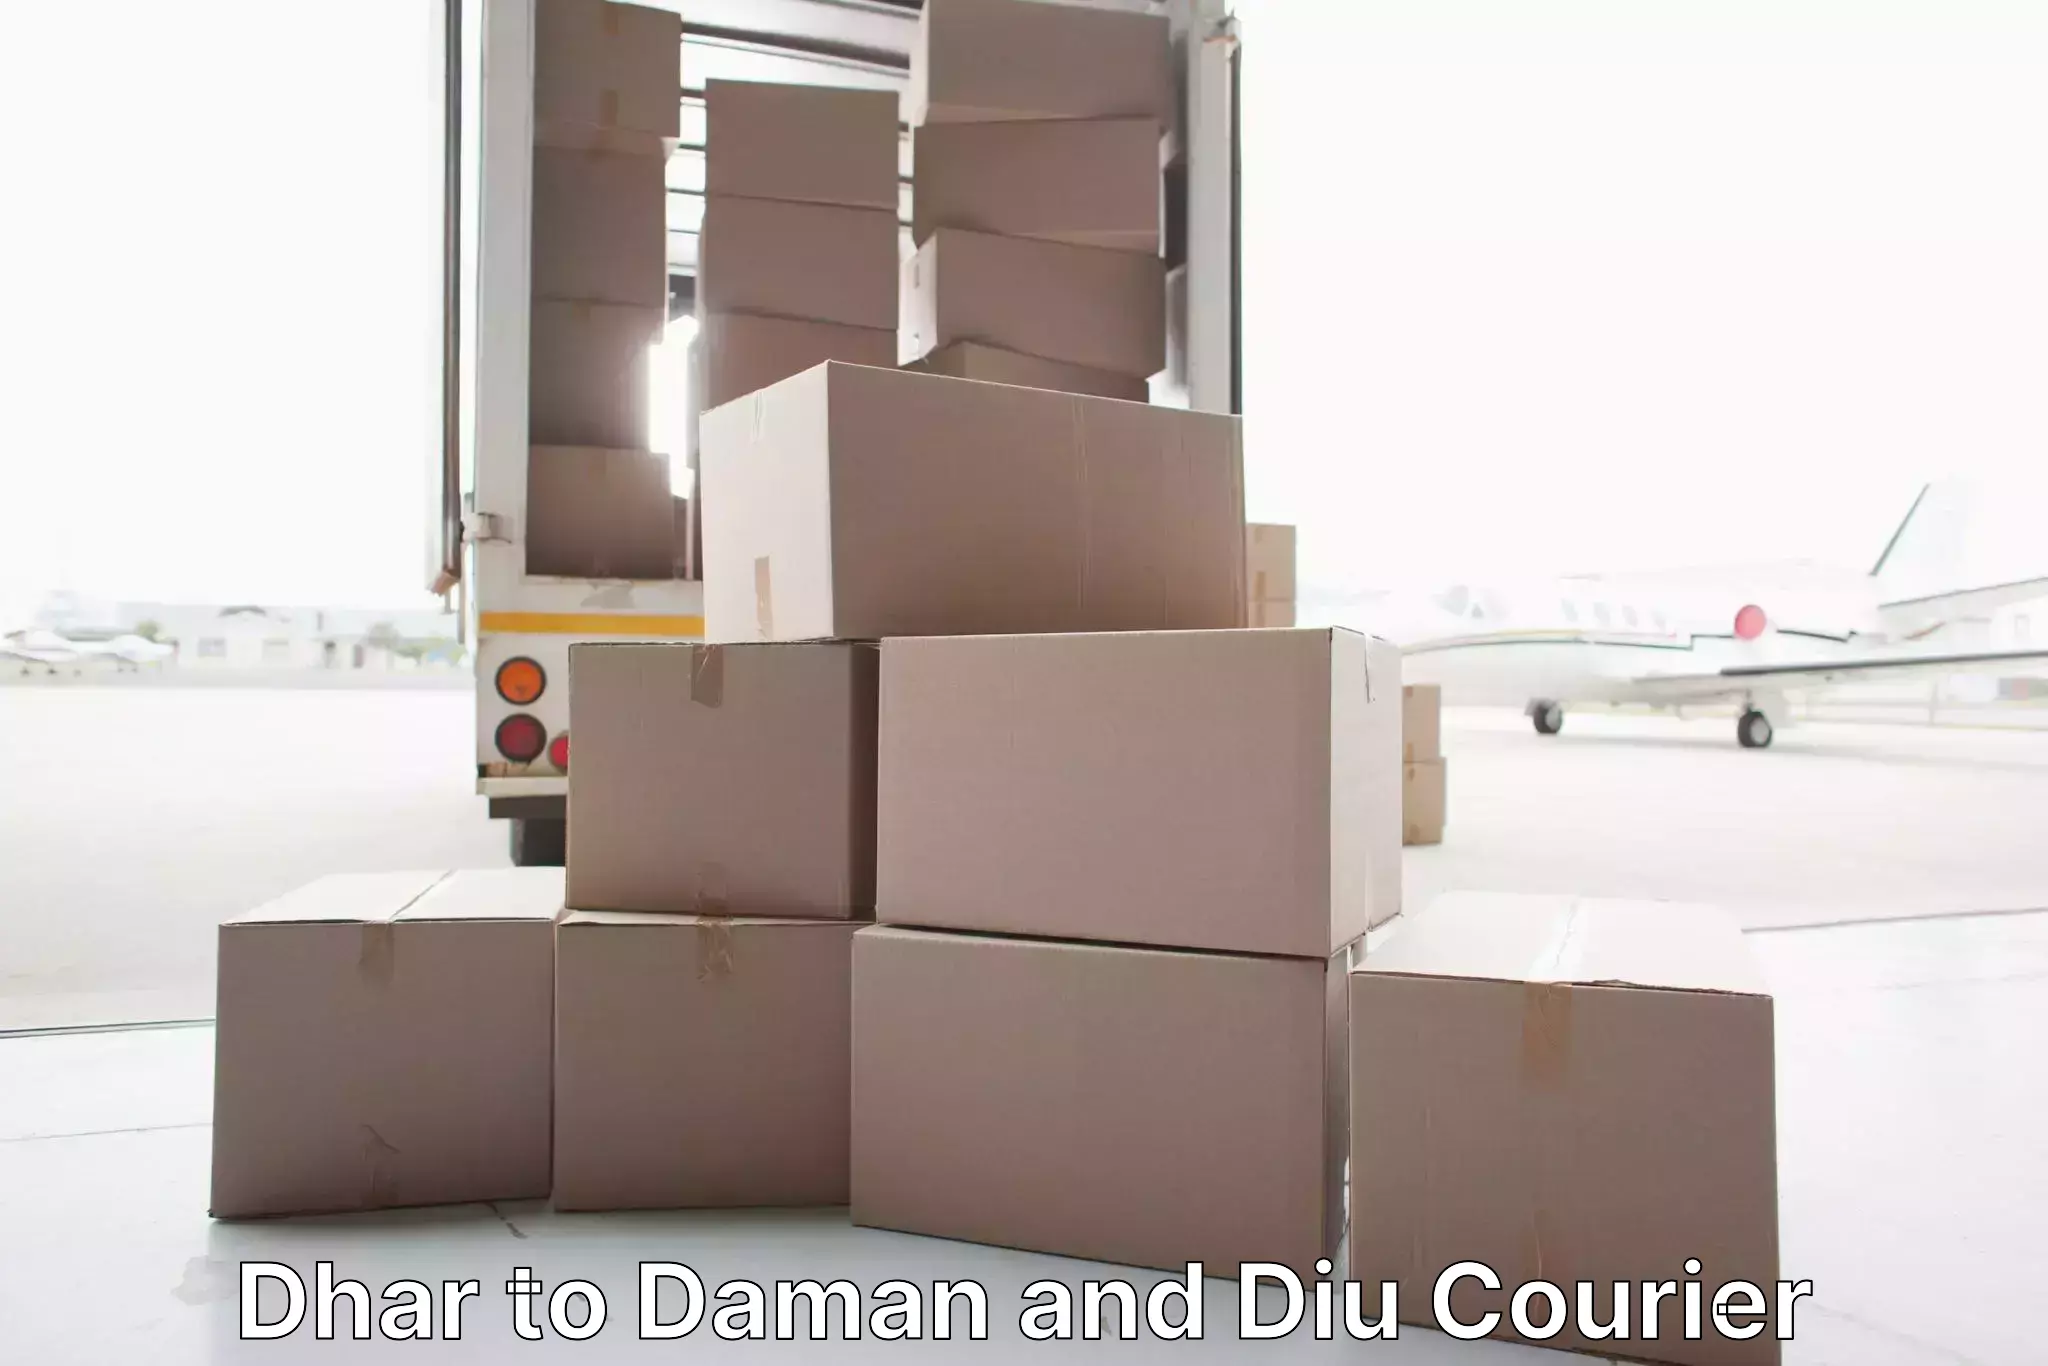 Home moving specialists Dhar to Daman and Diu